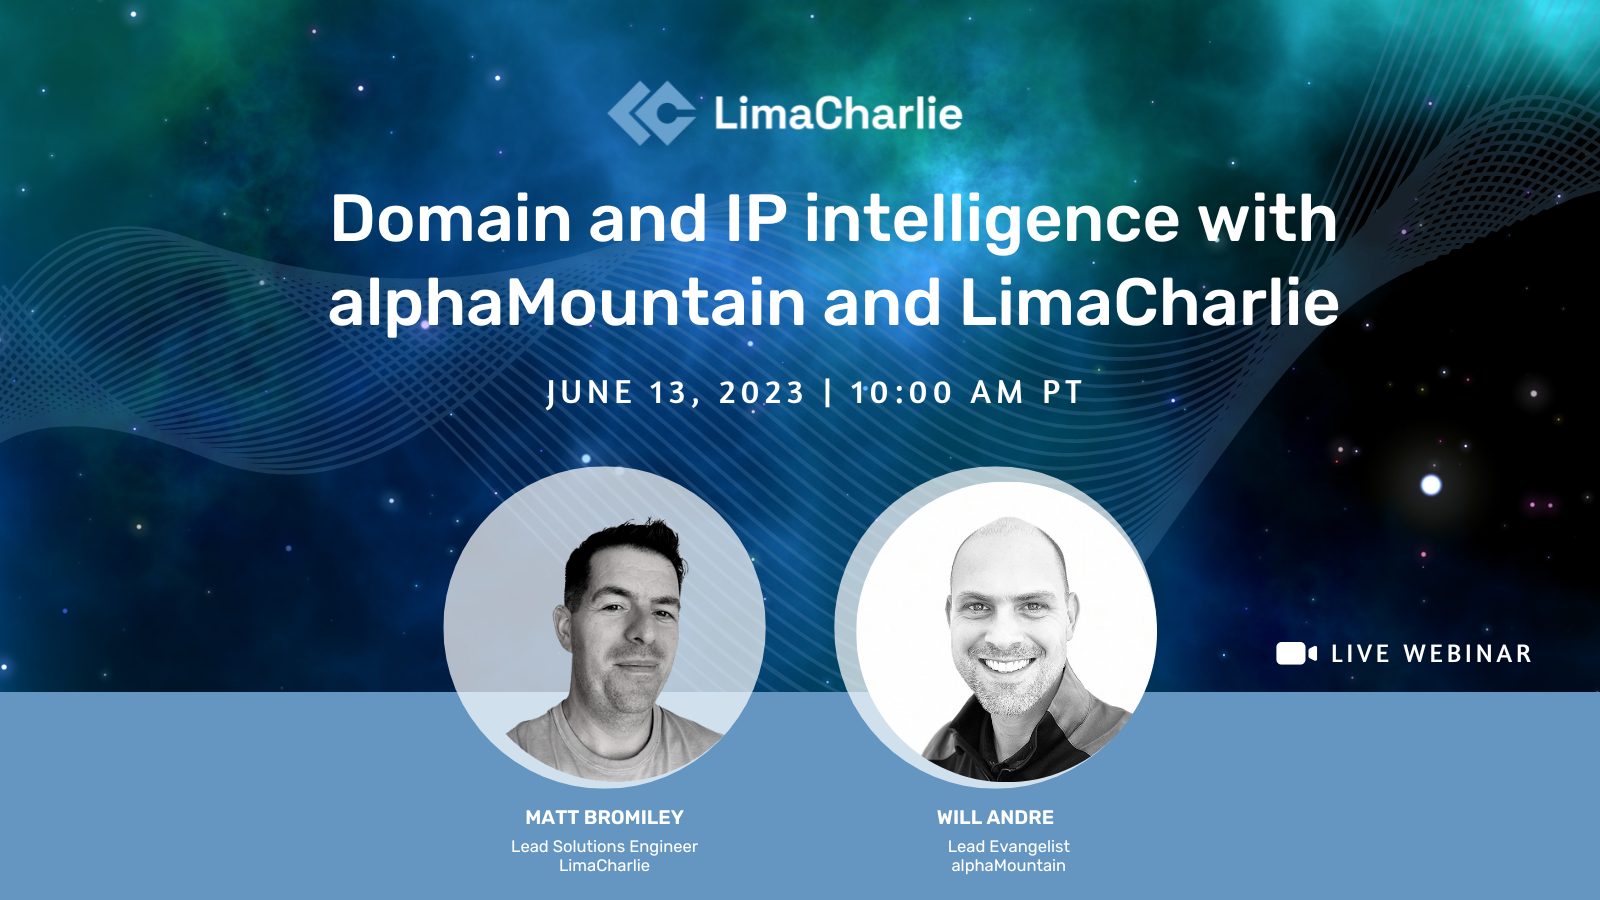 With how quickly threat actors move, your network and security teams need additional data to triangulate security investigations and ensure your users are safe. Learn how you can leverage LimaCharlie's integration with alphaMountain to provide domain and IP intelligence feeds for cyber protection based on continuously trained AI models.

alphaMountain helps security architects and analysts make better, faster decisions about the risks posed by a host on the internet.

In this webinar, get an overview of both LimaCharlie and alphaMountain and learn how you can build detection and response rules utilizing the telemetry provided through the newly-available alphaMountain integration.